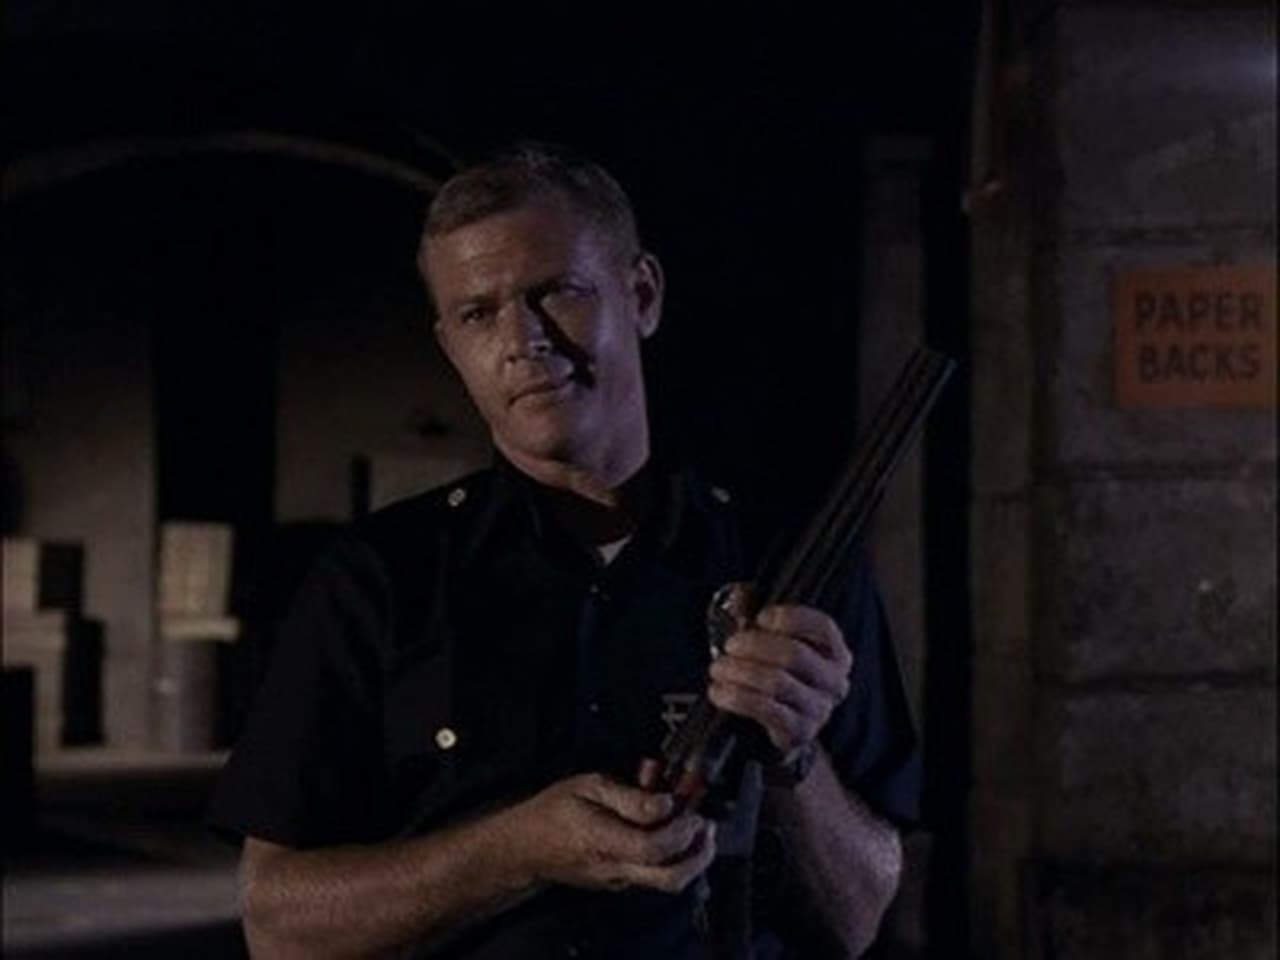 Adam-12 - Season 1 Episode 4 : Log 131: Reed, The Dicks Have Their Job And We Have Ours